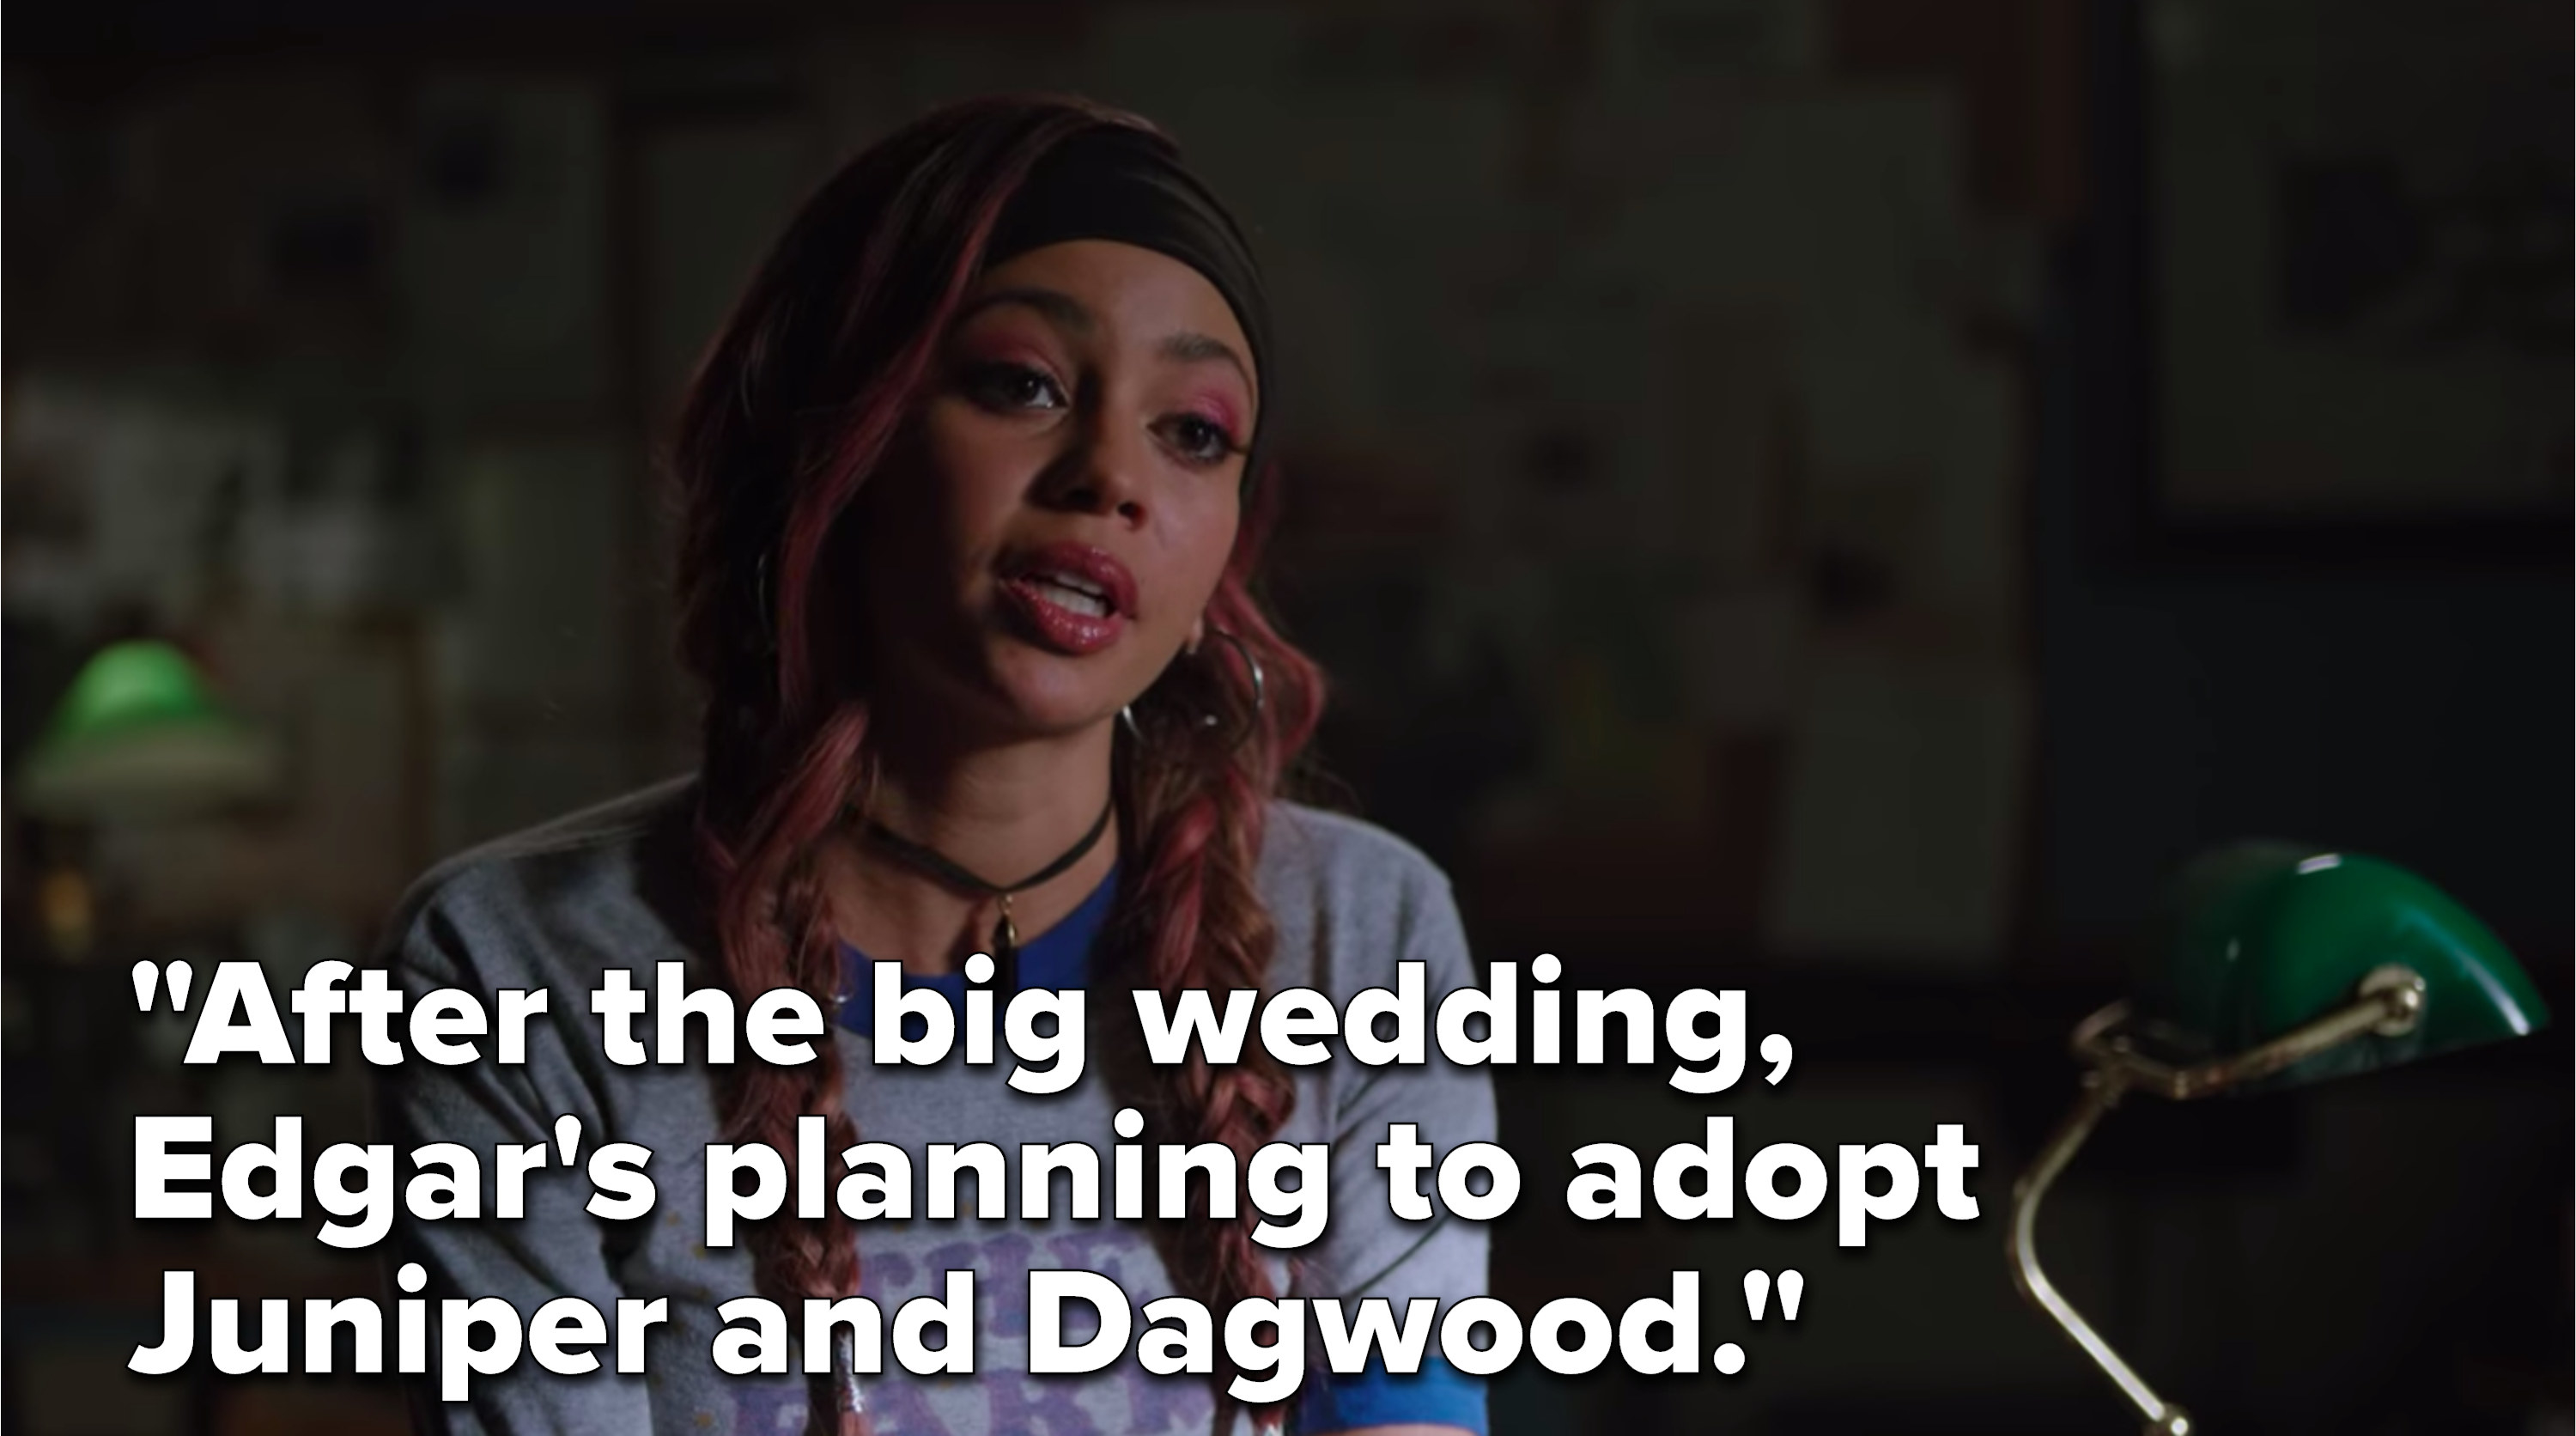 Toni says, &quot;After the big wedding, Edgar&#x27;s planning to adopt Juniper and Dagwood&quot;